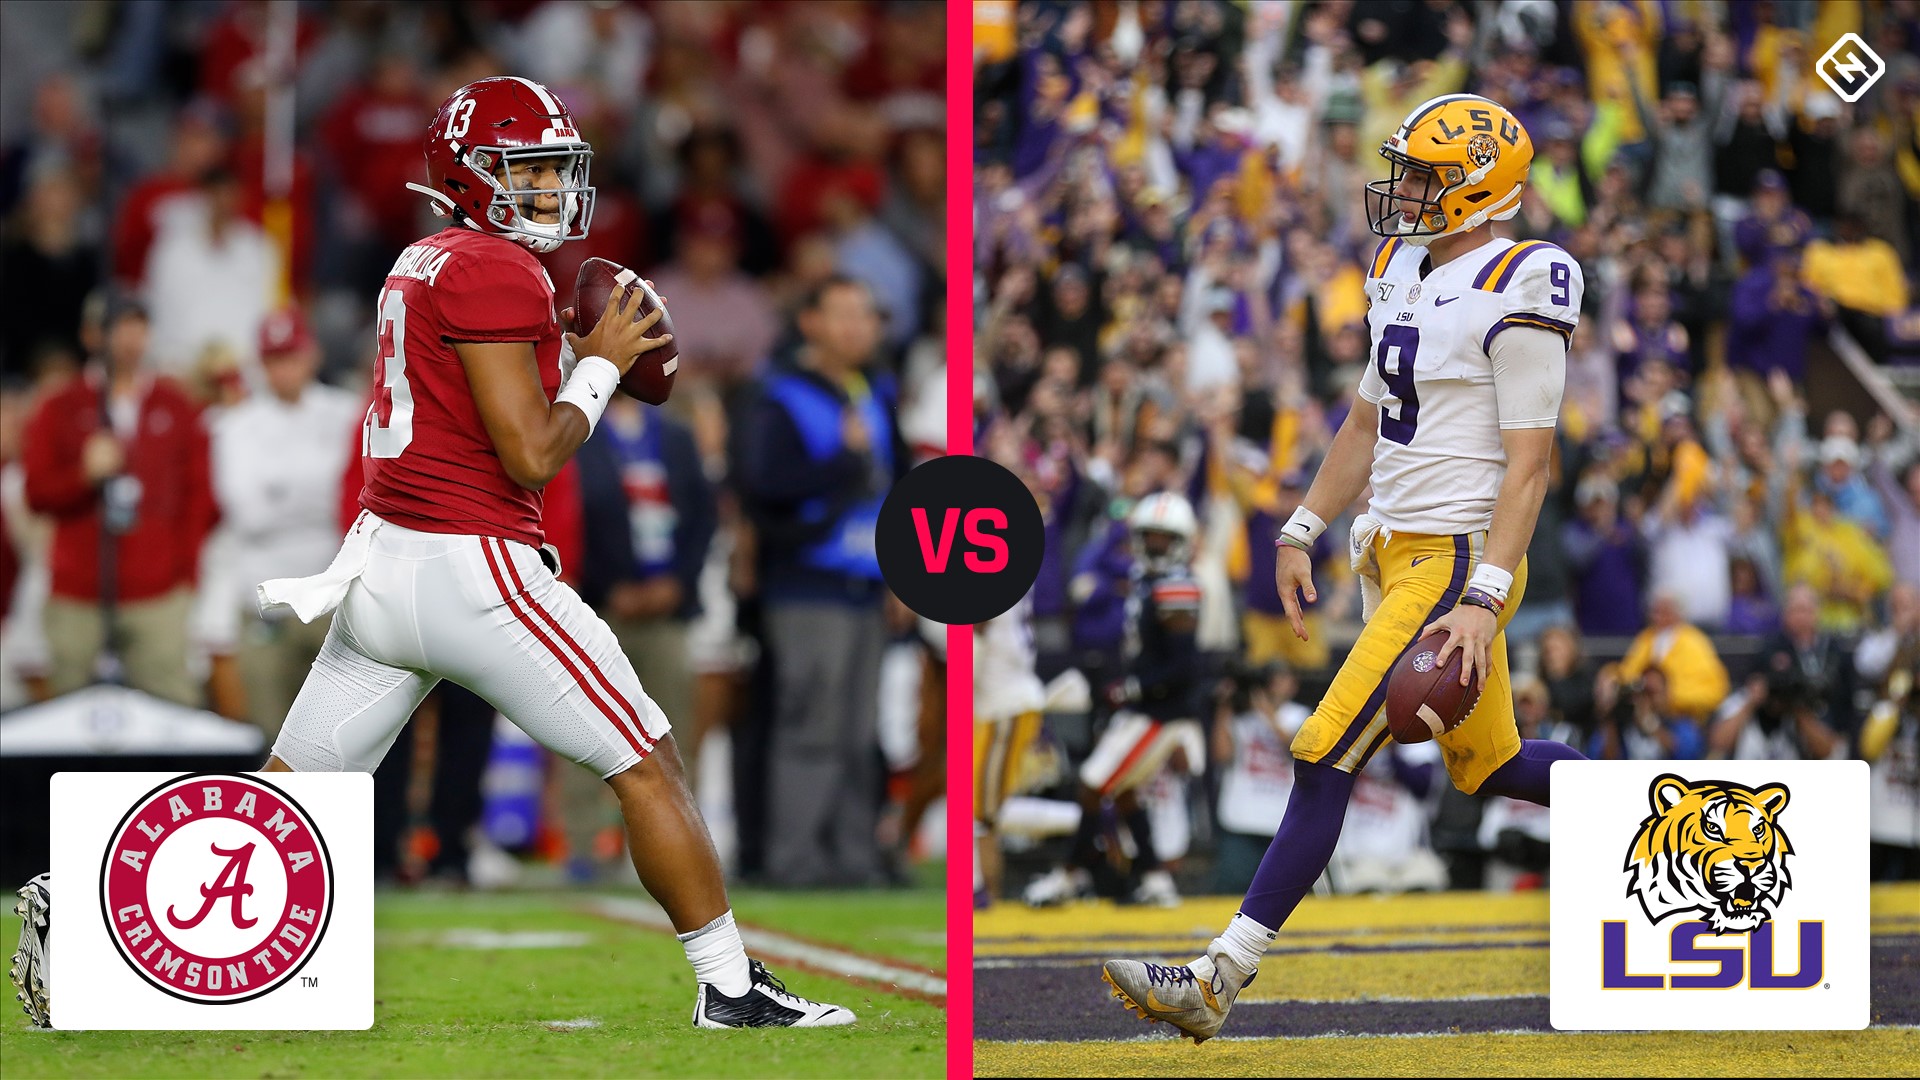 Alabama vs. LSU live score, updates, highlights from 'Game of the